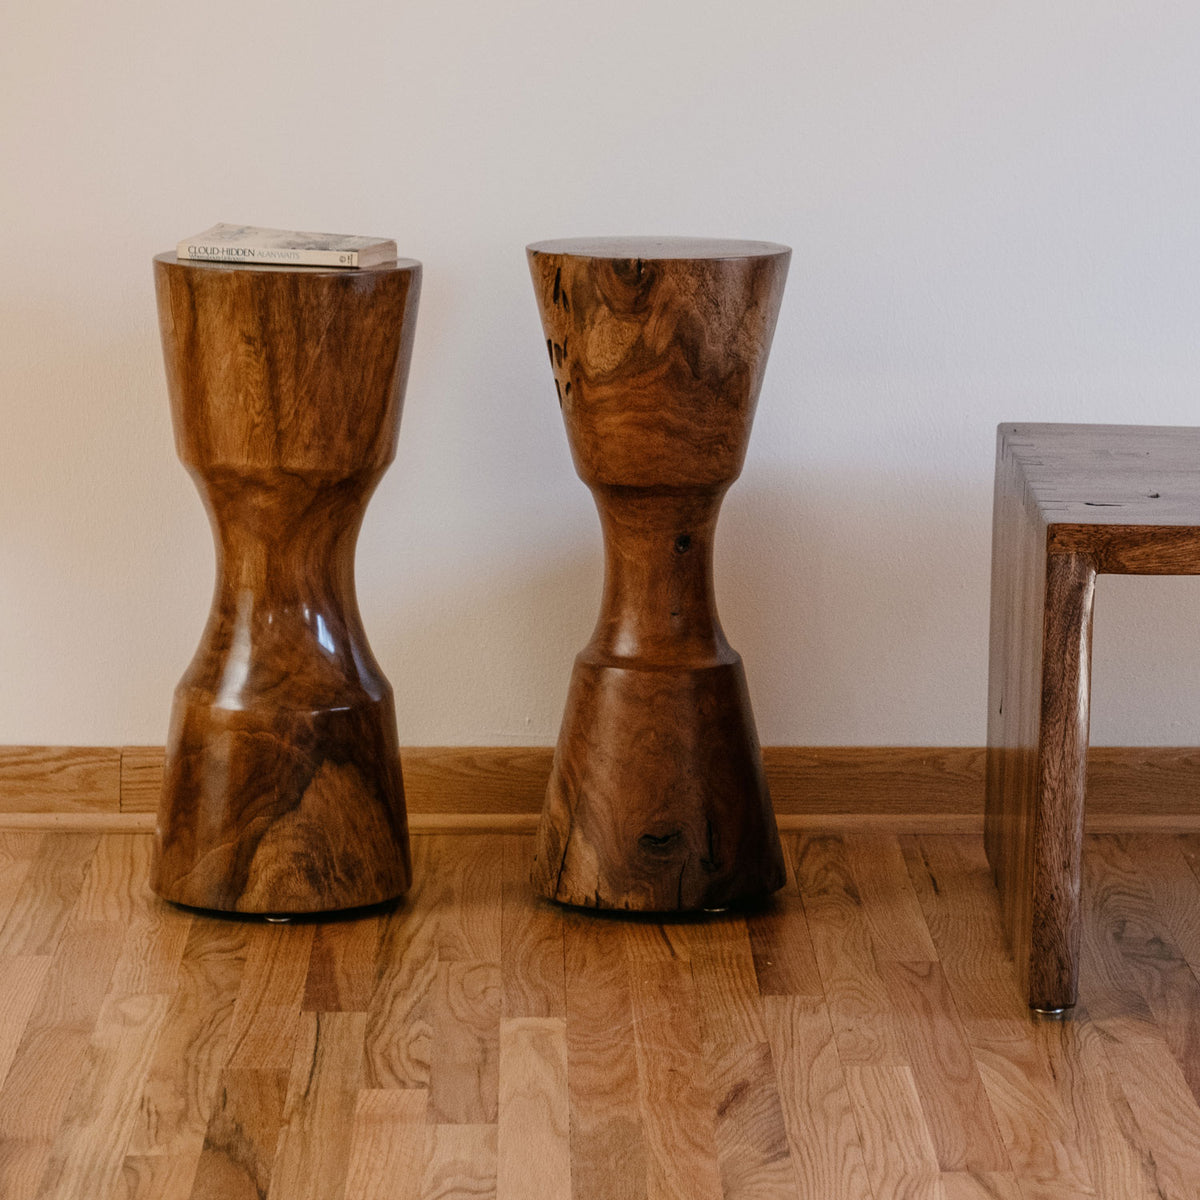 Stone Forest Rook Pedestals are hand-turned and finished, each is a little different in height and diameter. Made from Indian Rosewood. image 1 of 3